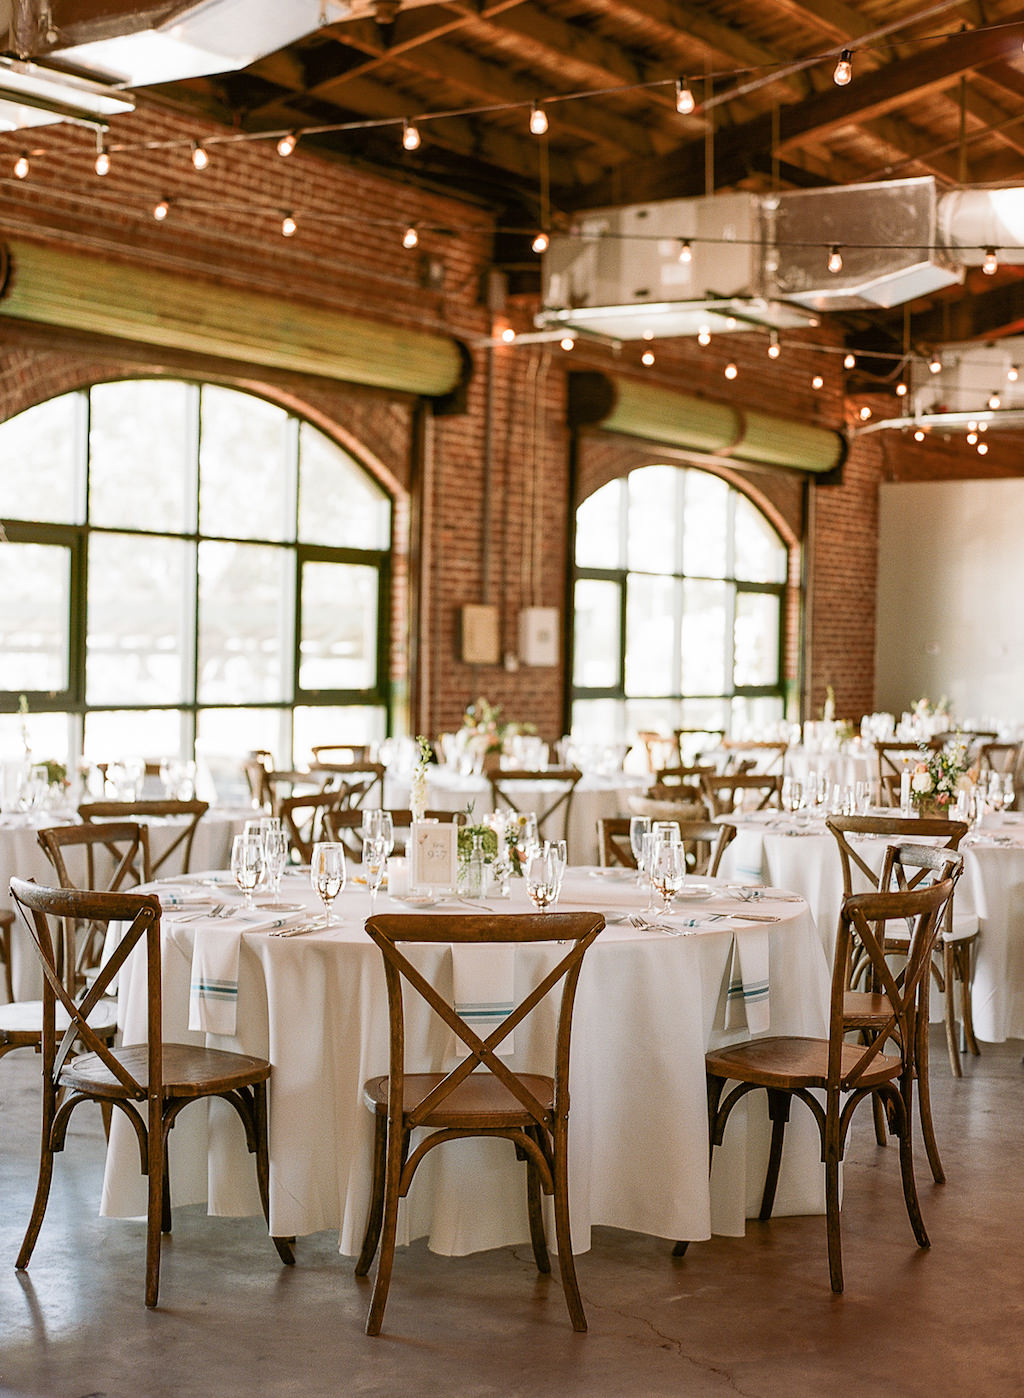 White and Teal Wedding Reception Decor with Wooden French Country Crossback Back Chairs, Teal Napkins, and String Lights | St Pete Wedding Reception Venue The Morean Center for Clay